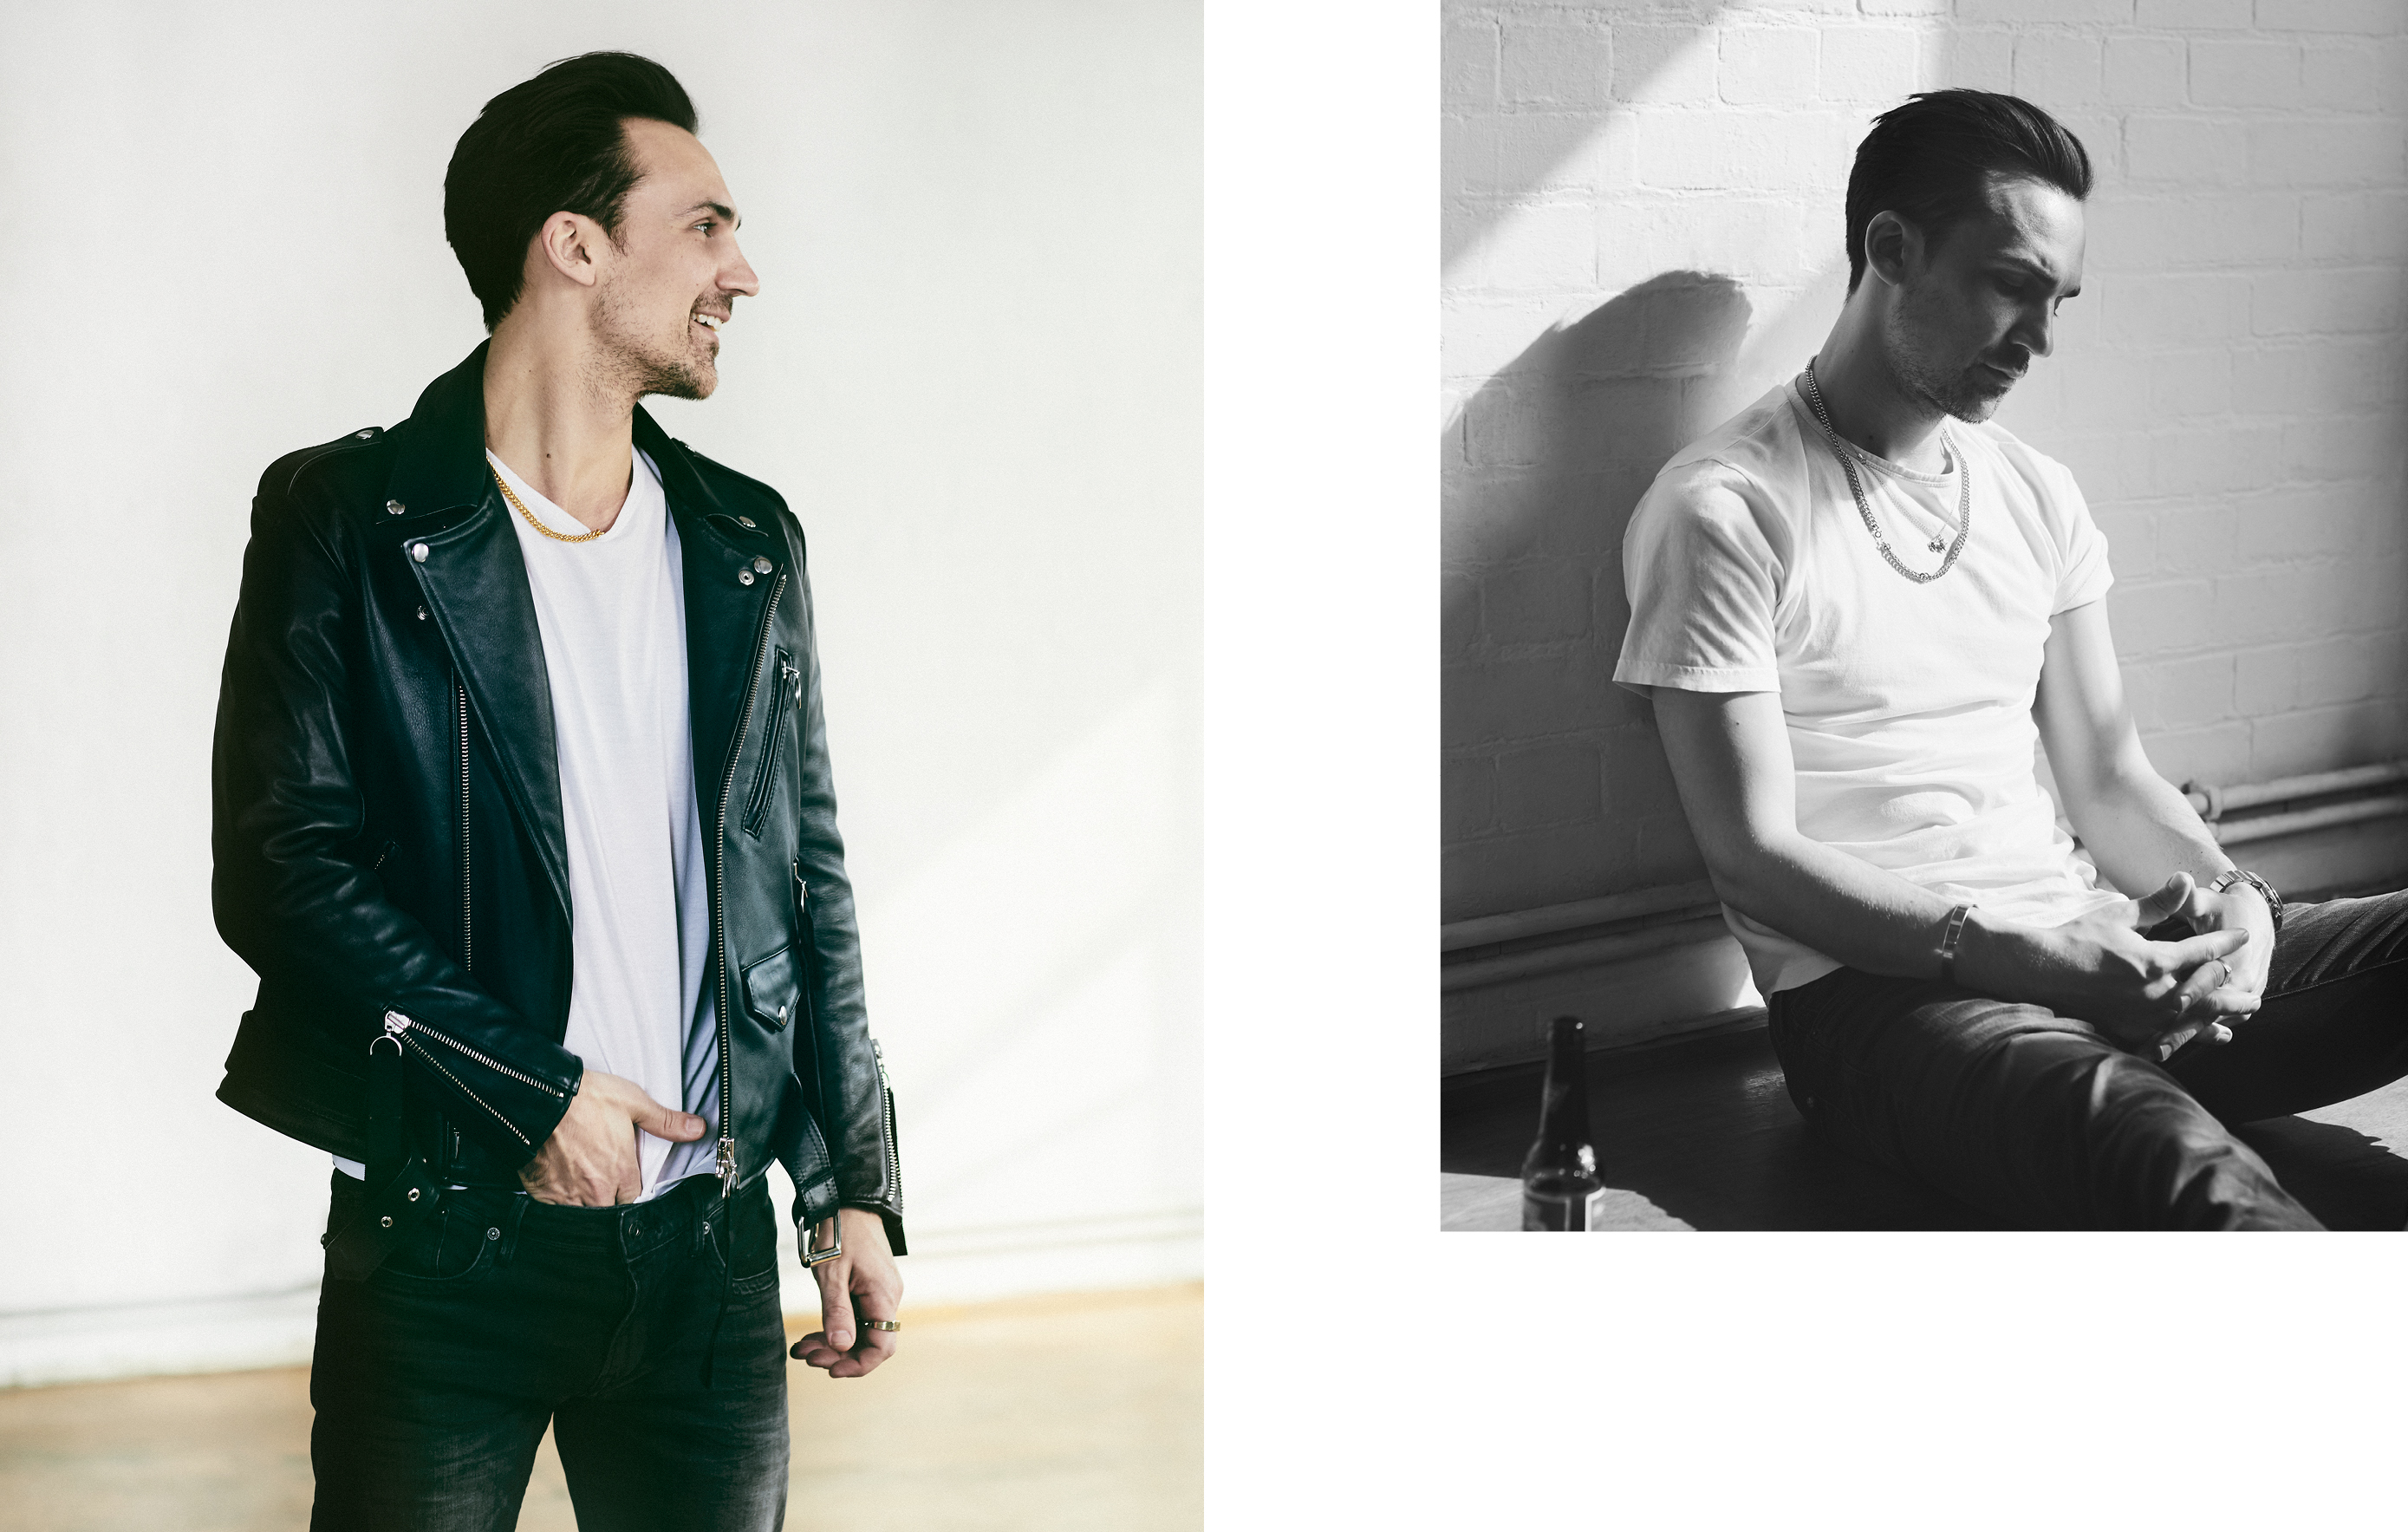 Left: Leather jacket by Matthew Miller. T-shirt by Sunspel. Jeans by A.P.C.Right: T-shirt by Sunspel. Jeans by A.P.C.